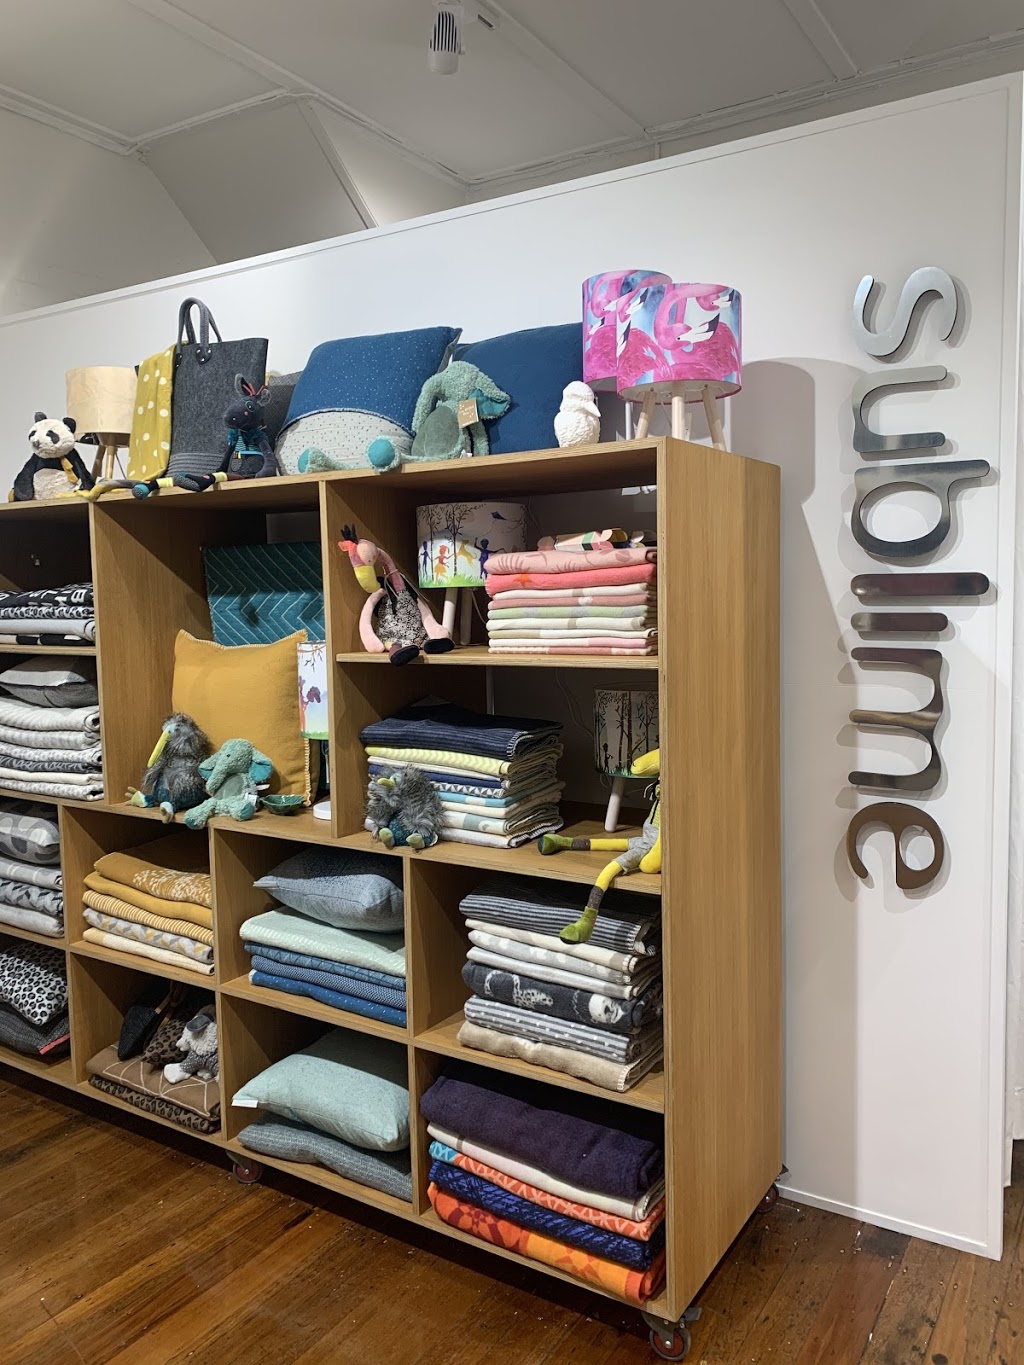 Sublime Things | jewelry store | 150 Sydney Rd, Fairlight NSW 2093, Australia | 0401807597 OR +61 401 807 597